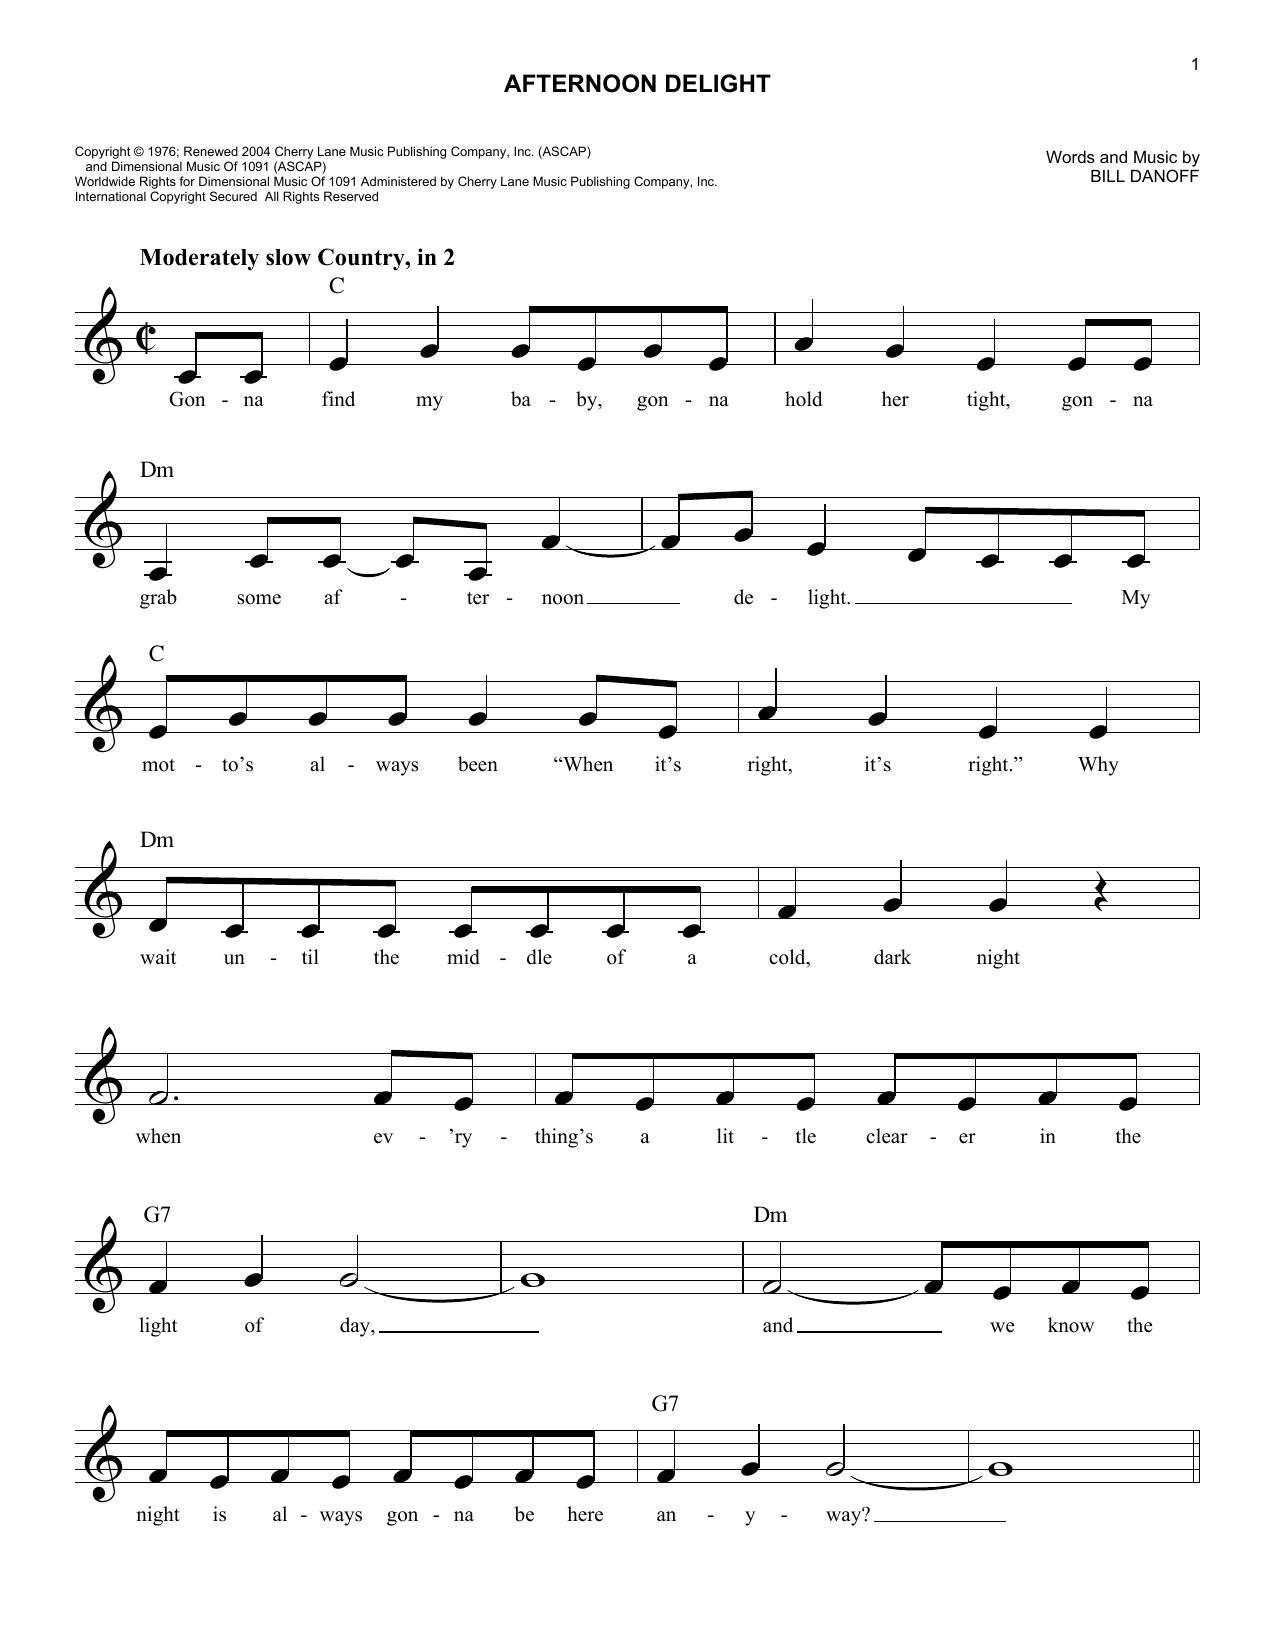 Download Starland Vocal Band Afternoon Delight Sheet Music